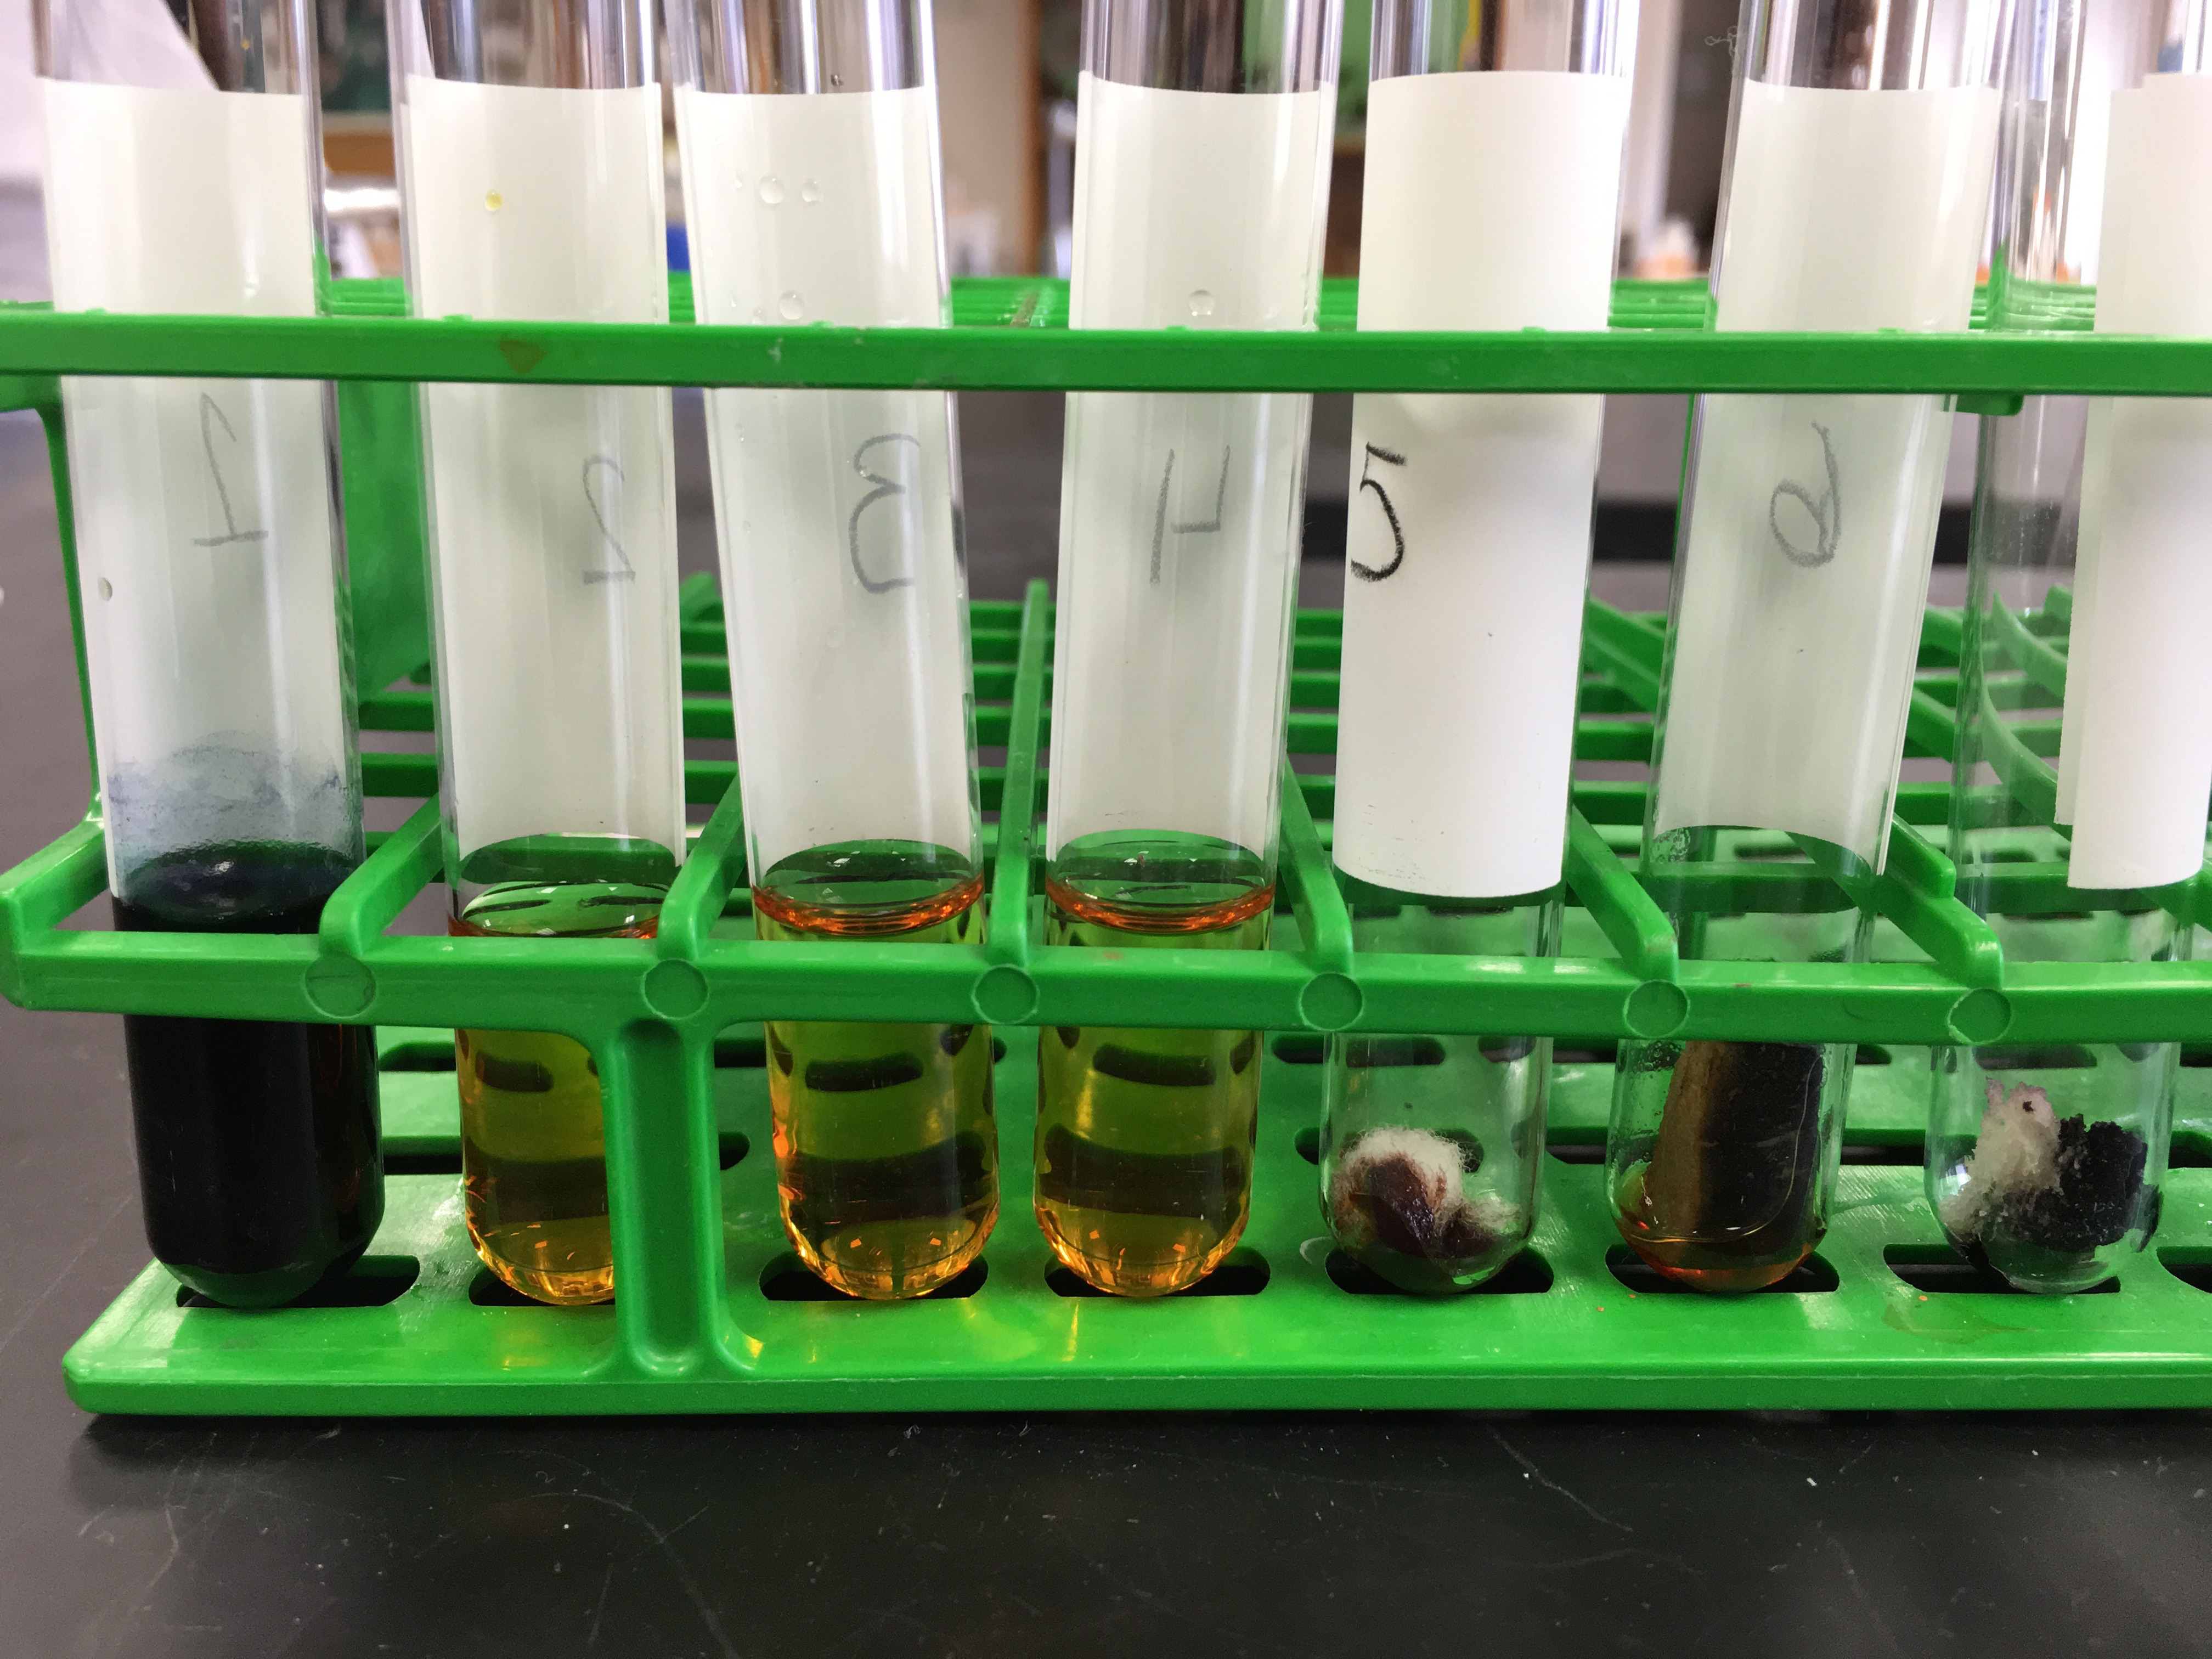 Results from experiment 1. The tubes in the picture correspond from left to right to tubes 1 to 7 in table 5.2. Please use the results shown in this picture to fill in the two empty colummns in the table.